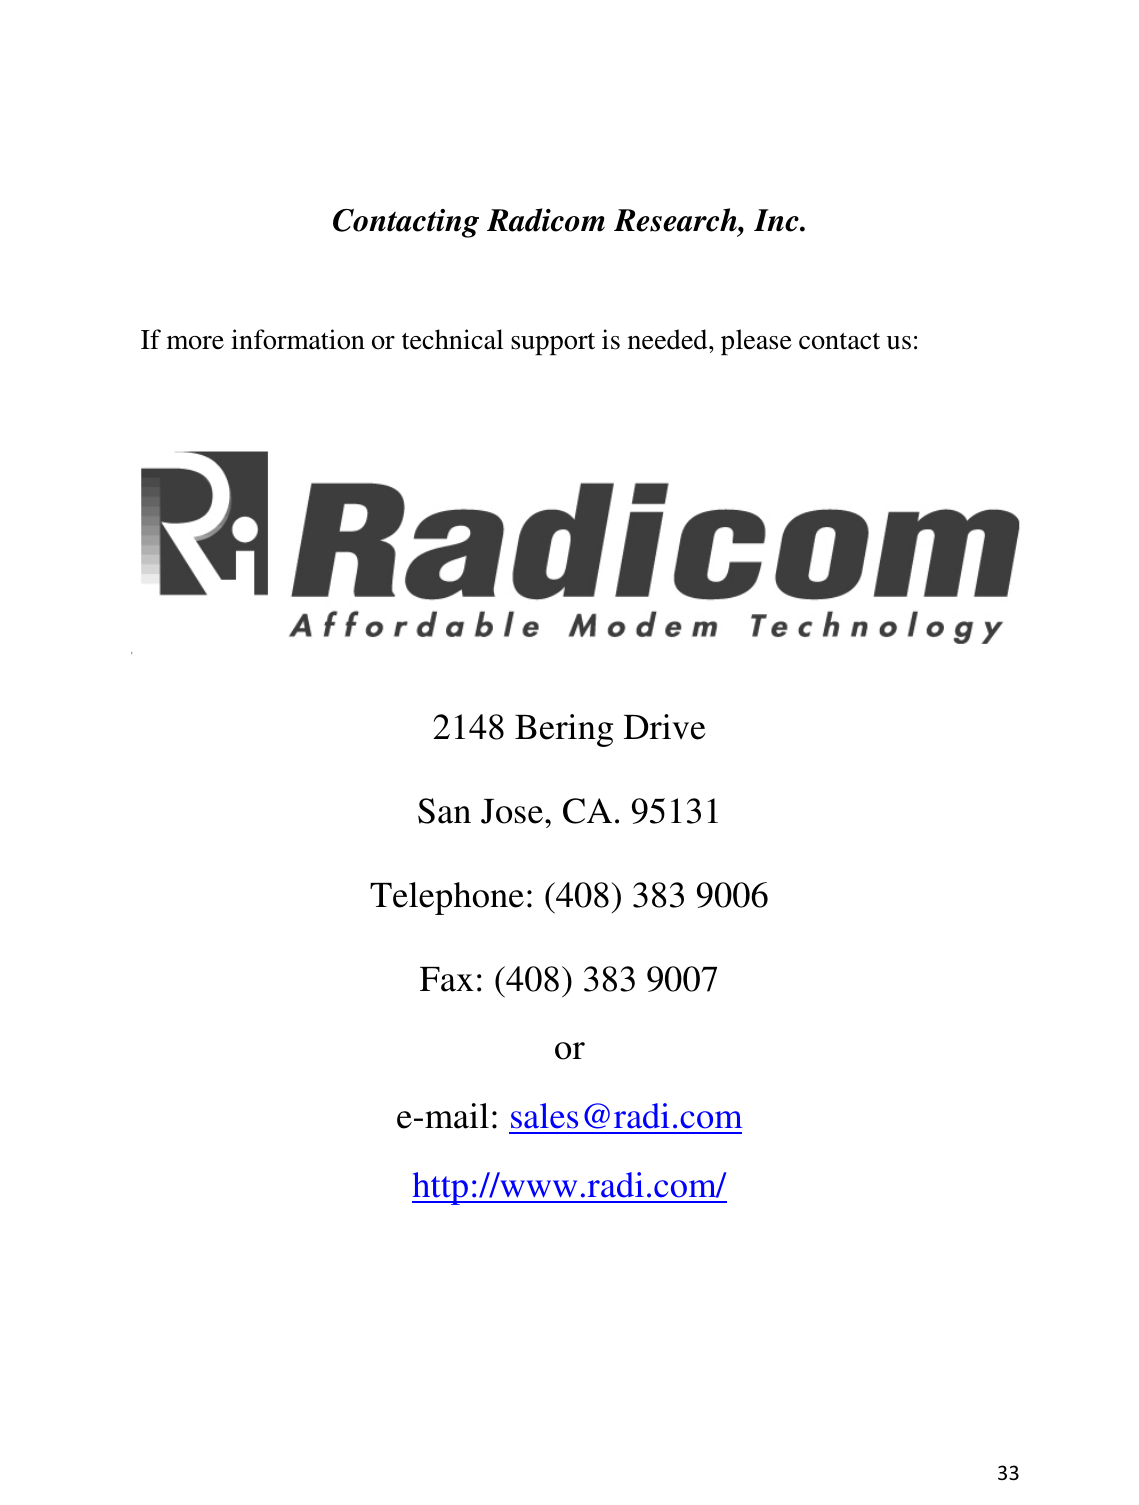 33      Contacting Radicom Research, Inc.     If more information or technical support is needed, please contact us:       2148 Bering Drive   San Jose, CA. 95131   Telephone: (408) 383 9006   Fax: (408) 383 9007 or e-mail: sales@radi.com http://www.radi.com/           